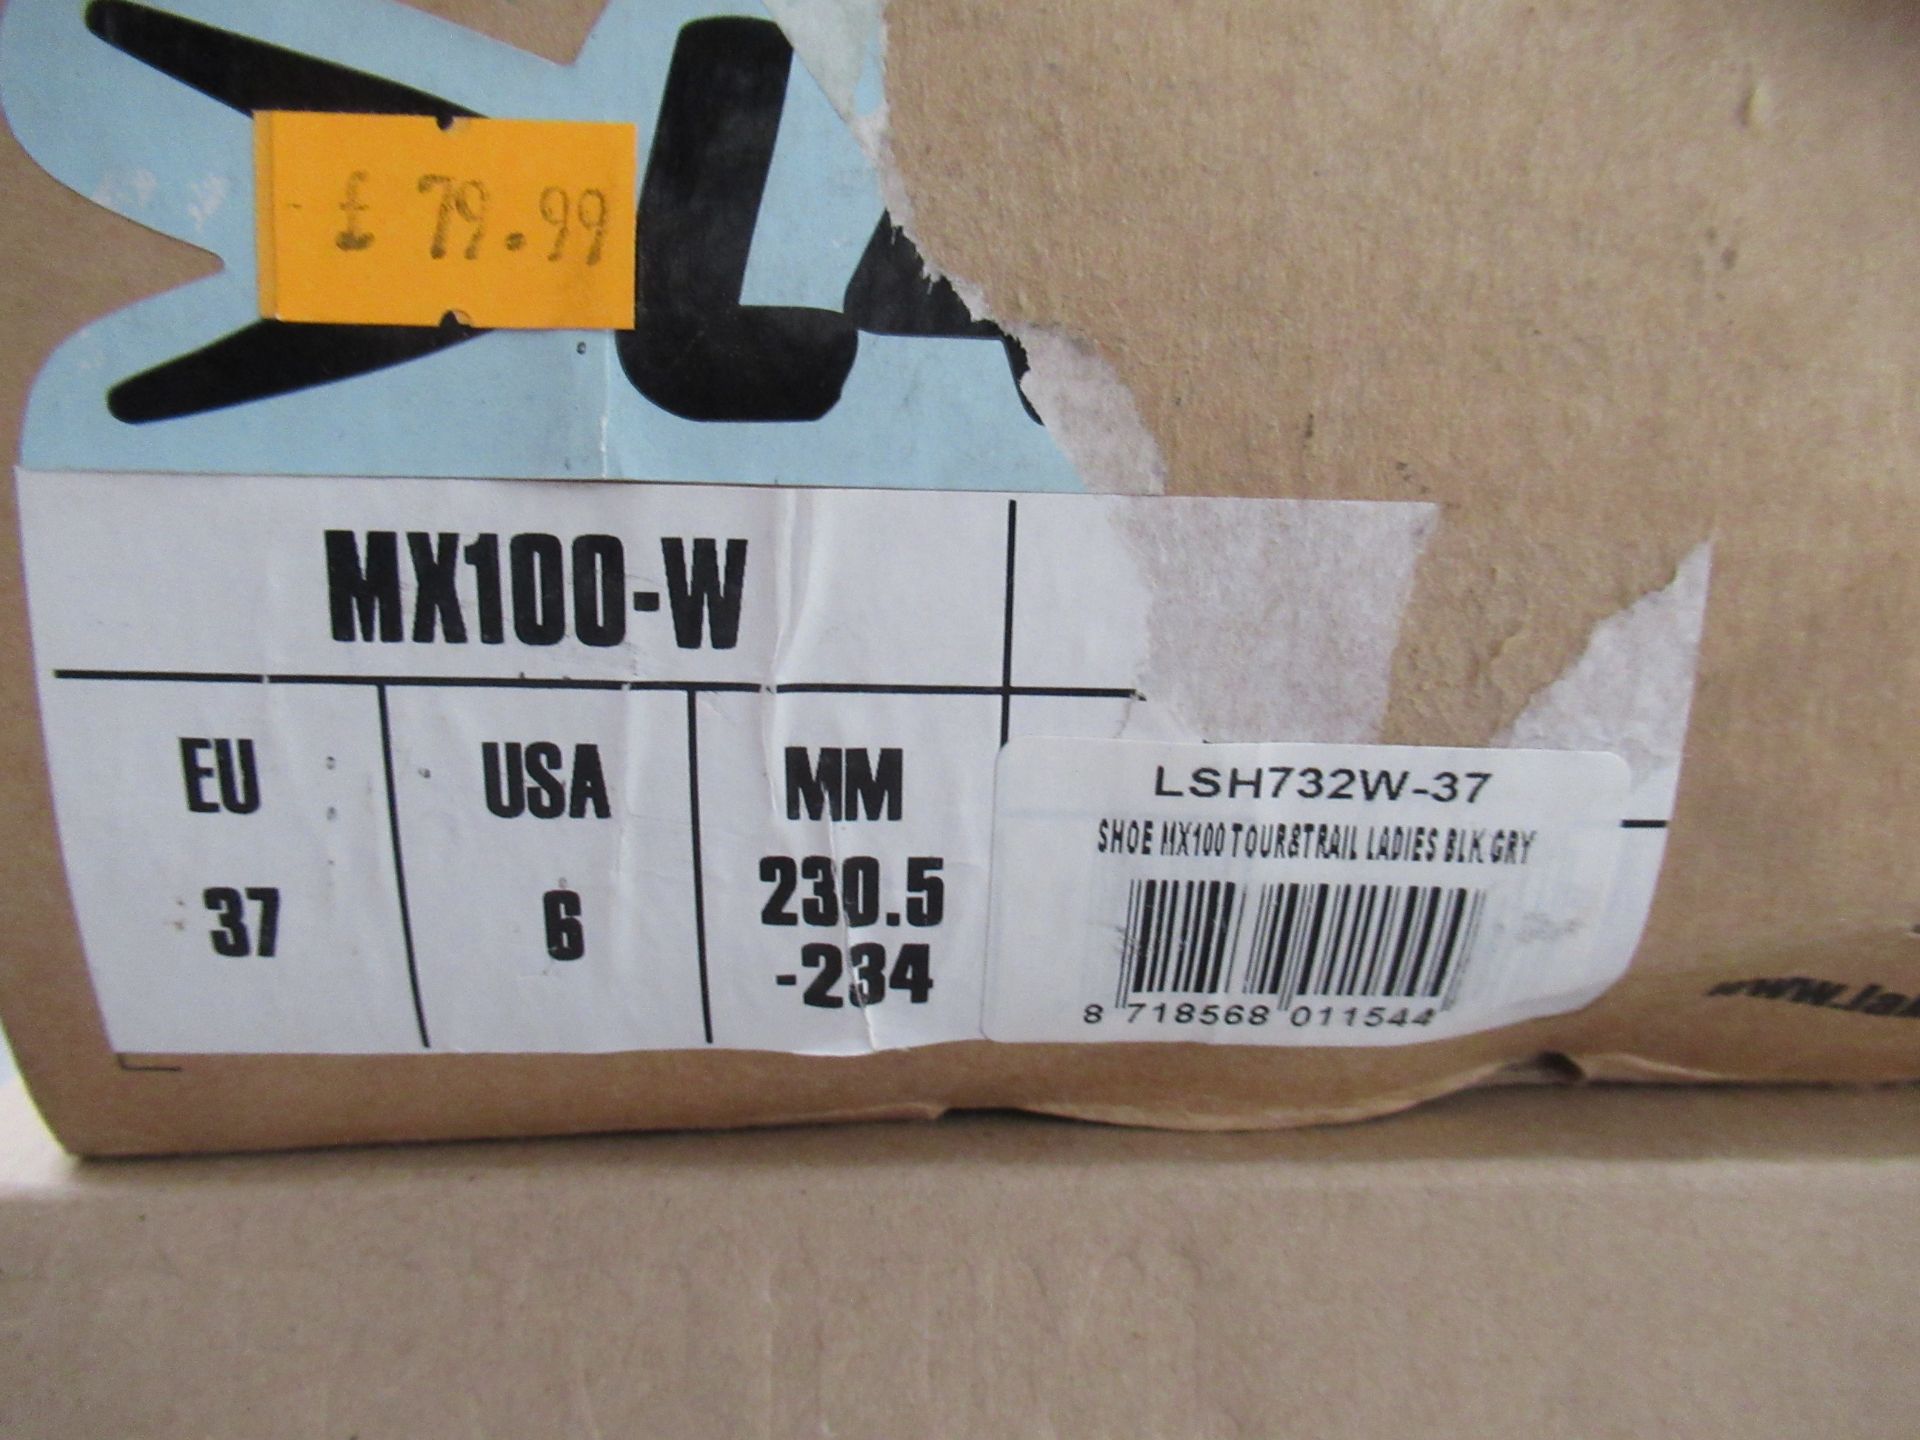 2 x Pairs of ladies cycling shoes: 1 x Lake MX100-W EU size 37 (RRP£79.99) and 1 x Pearl Izumi W Sel - Image 2 of 7